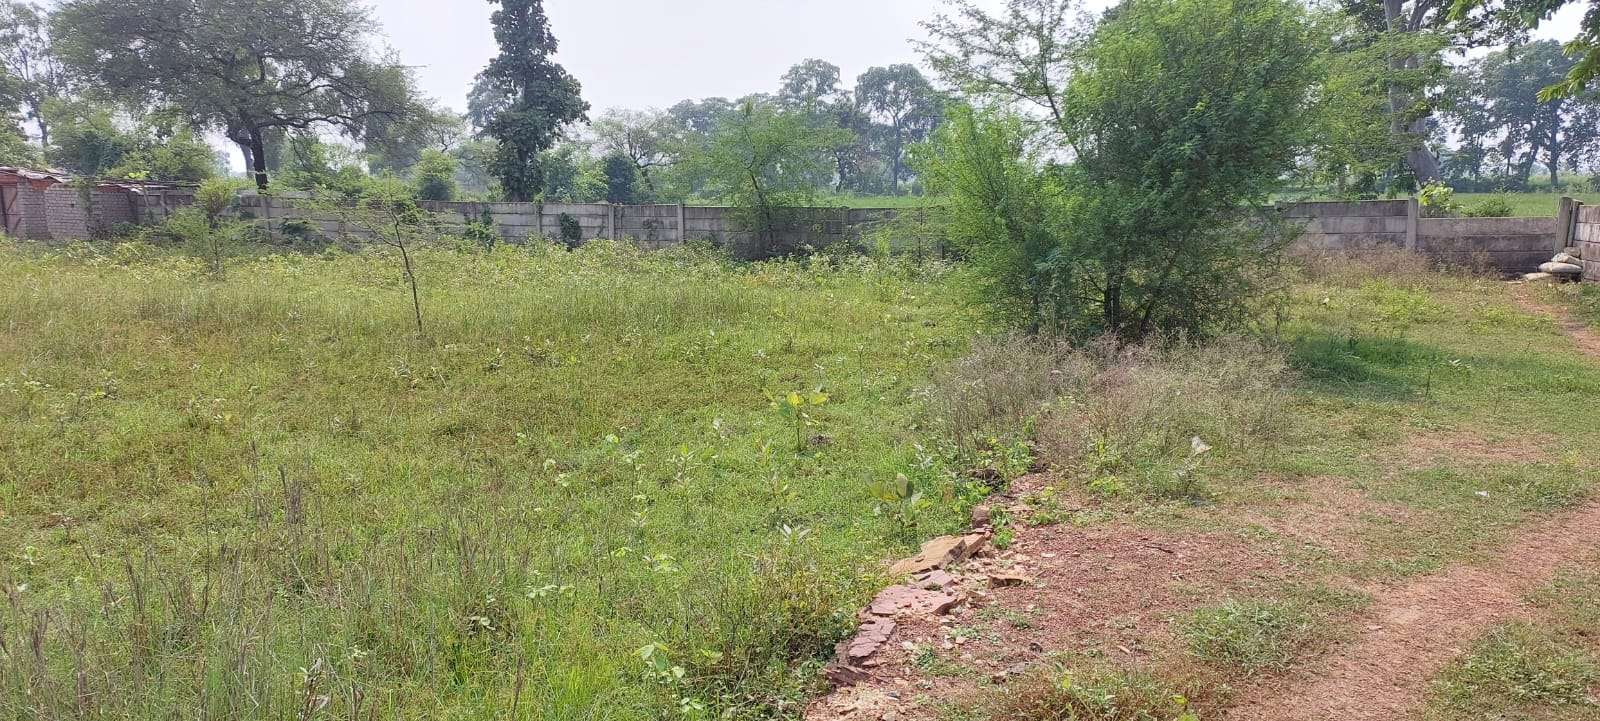 Property in Dayalband, Bilaspur  1+ Property for Sale in Dayalband,  Bilaspur